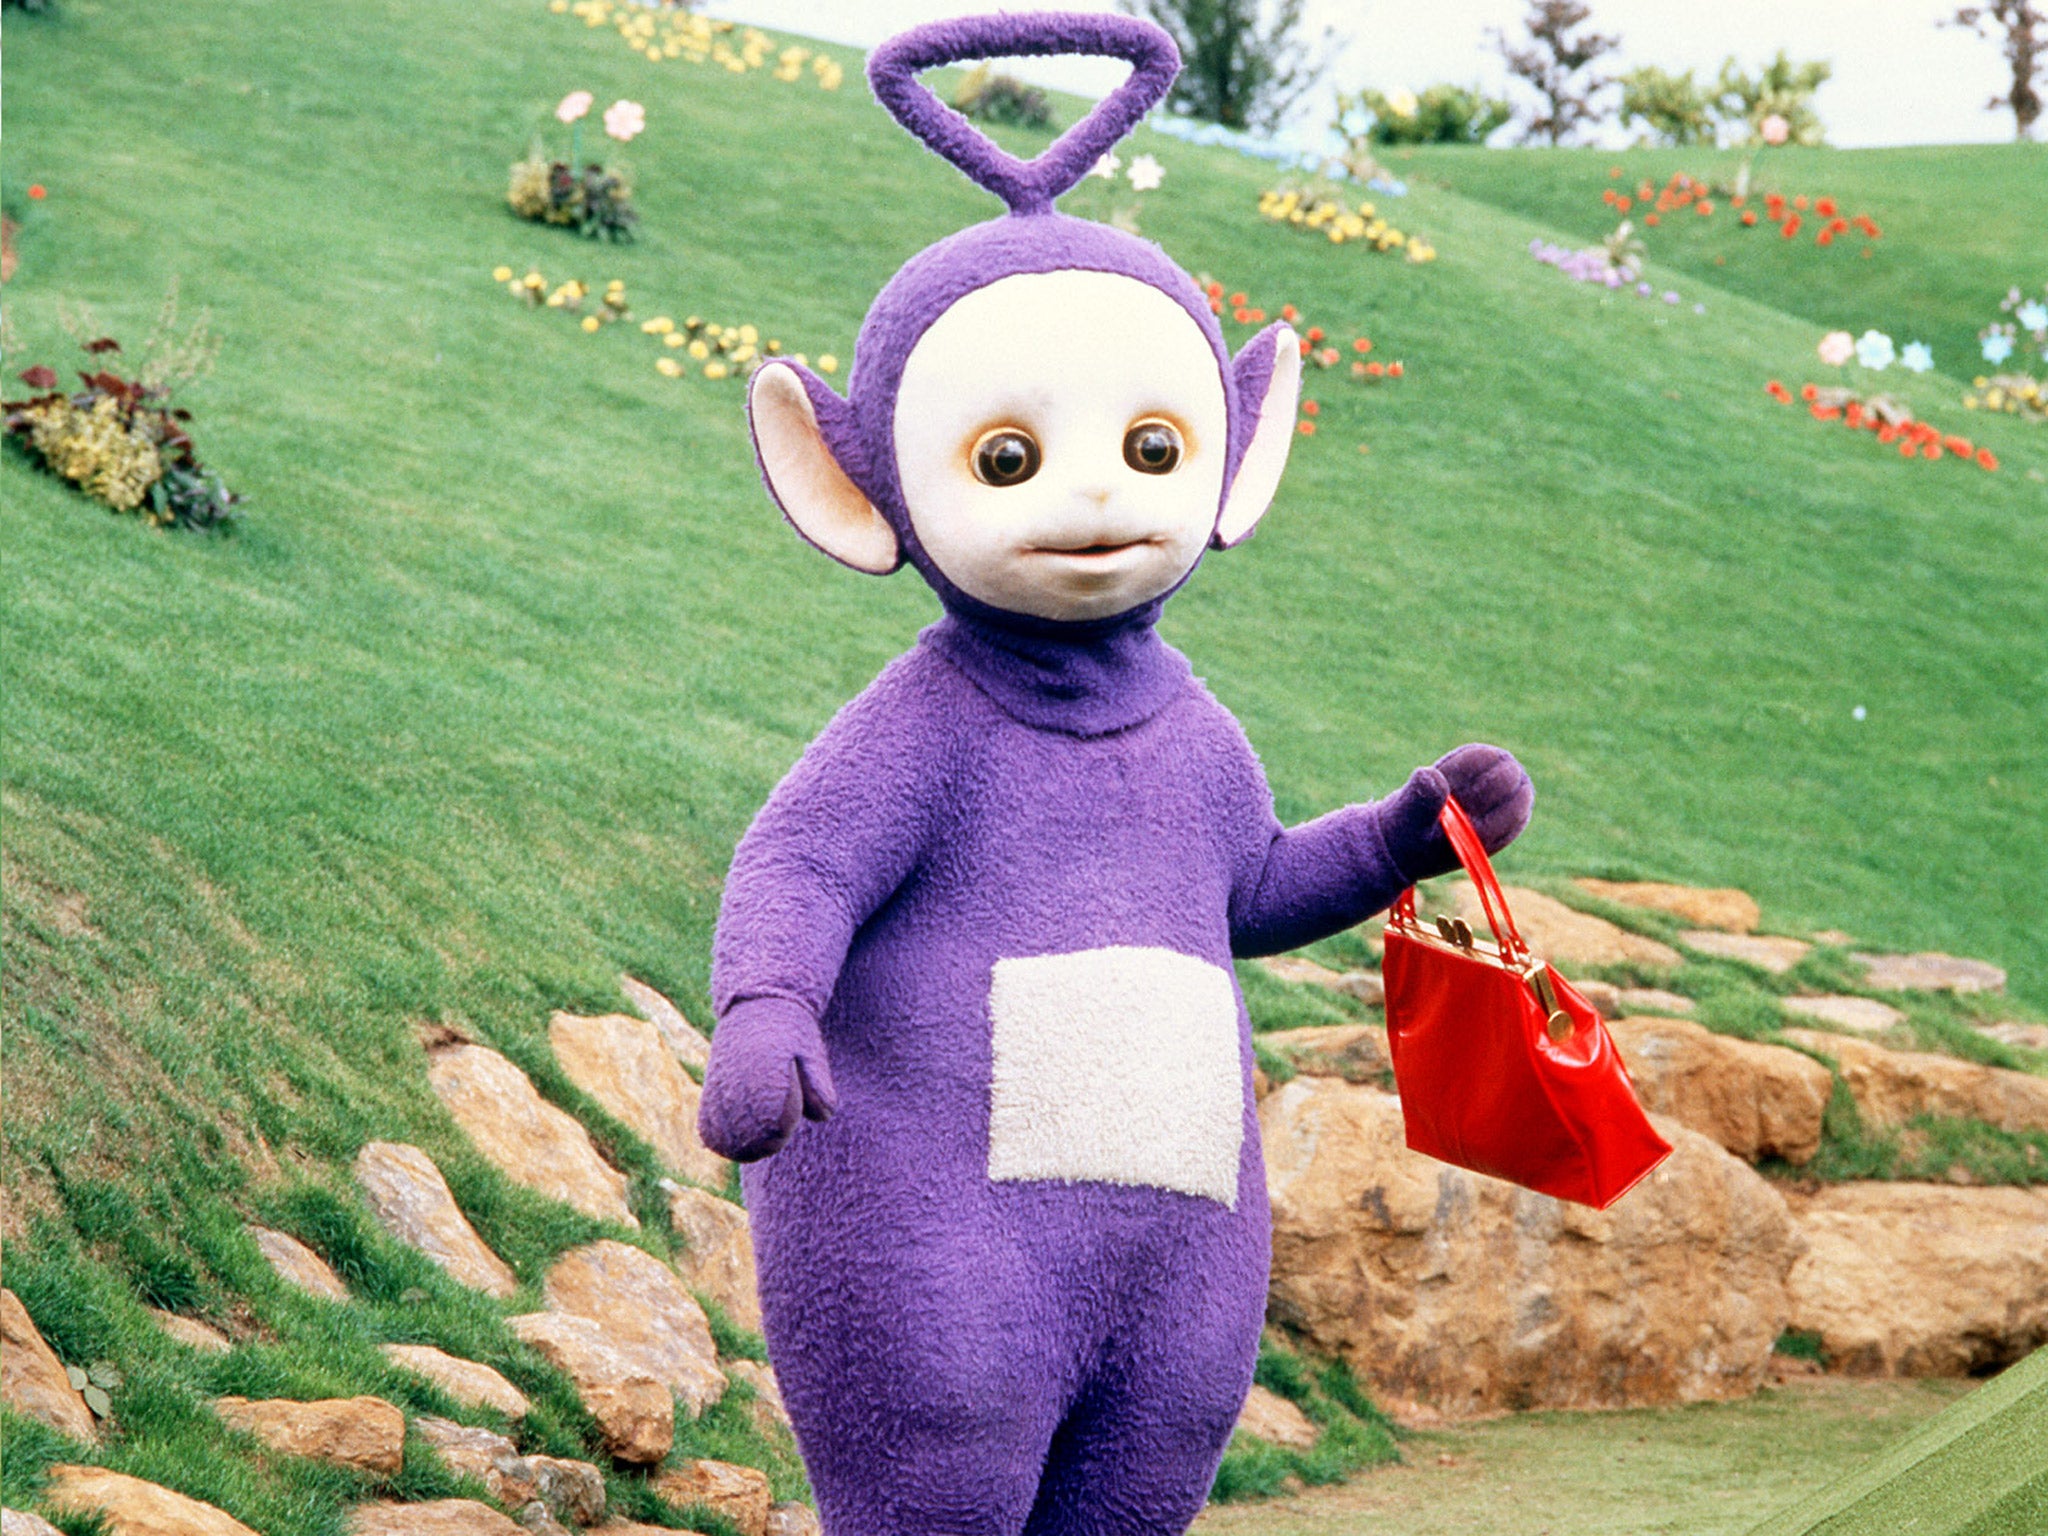 Tinky Winky from 'Teletubbies'